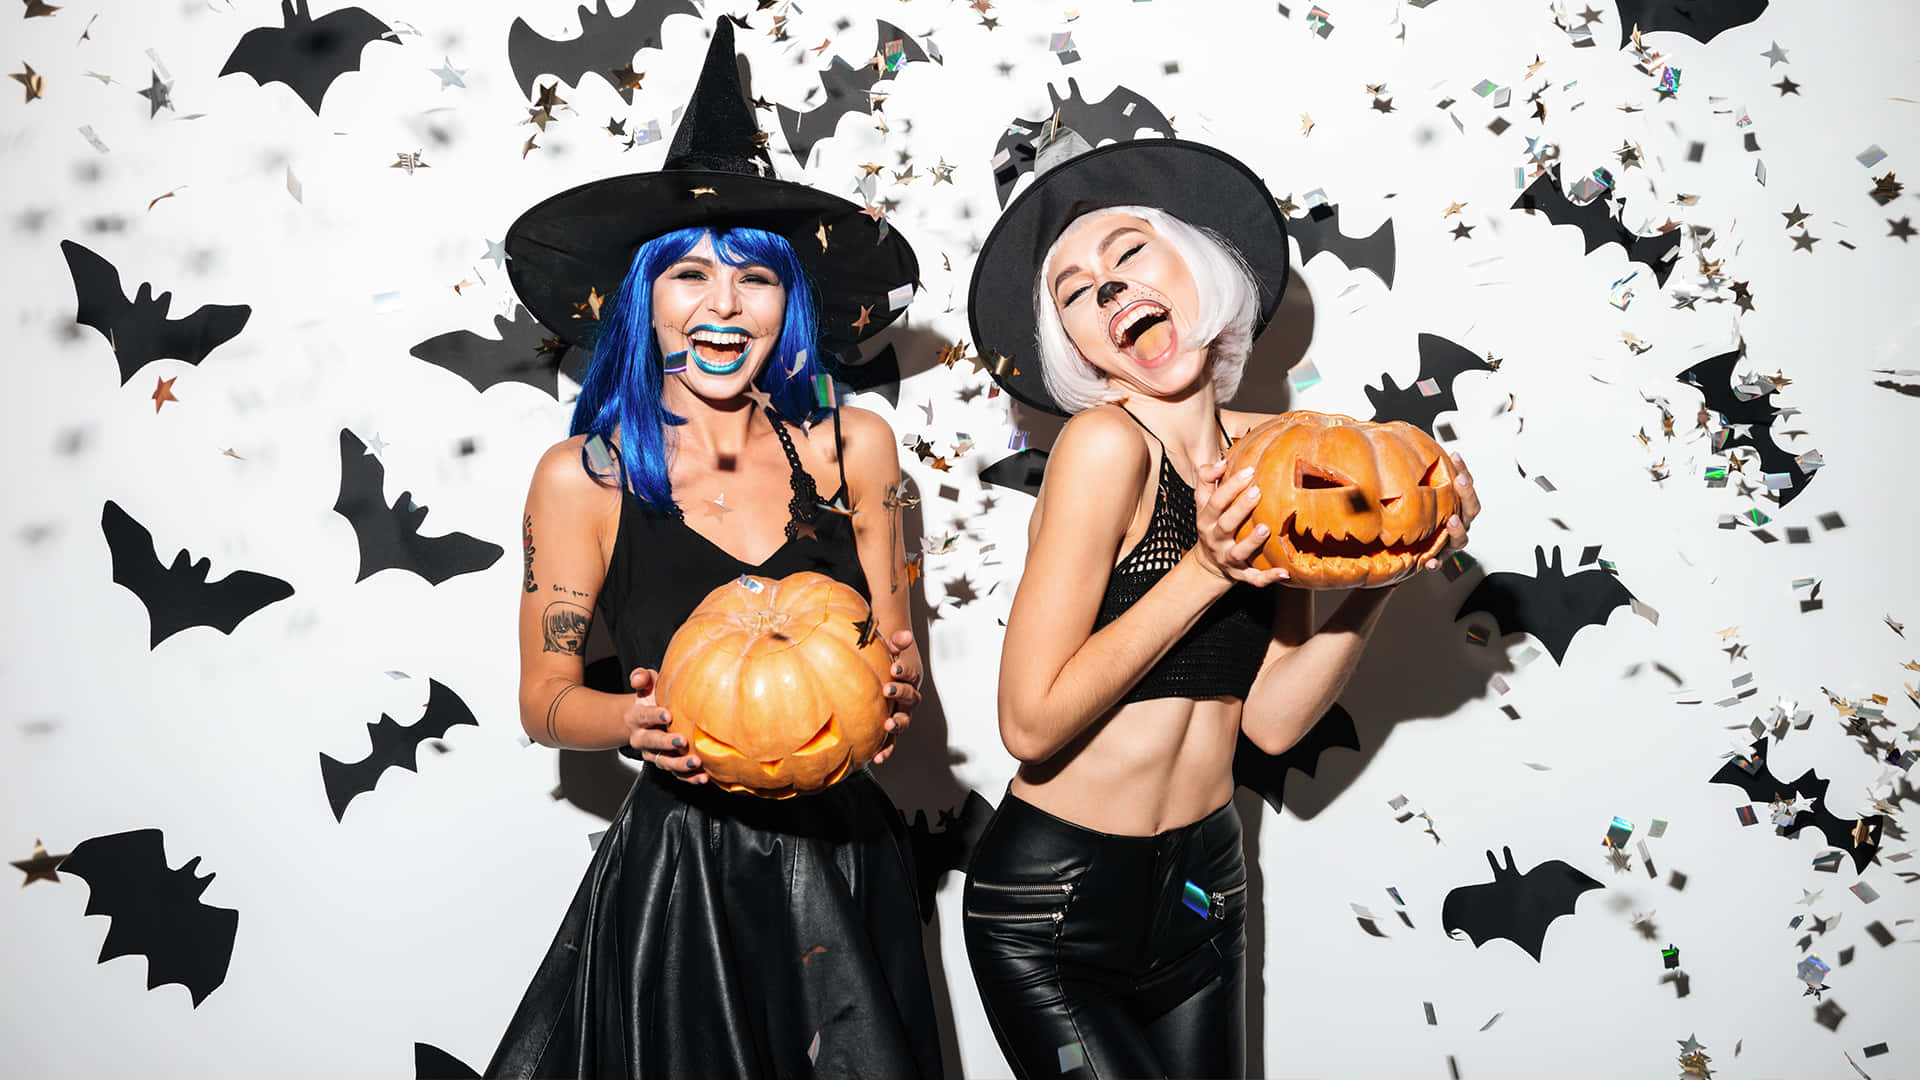 Stay safe and have fun this Halloween with these creative and unique costumes Wallpaper